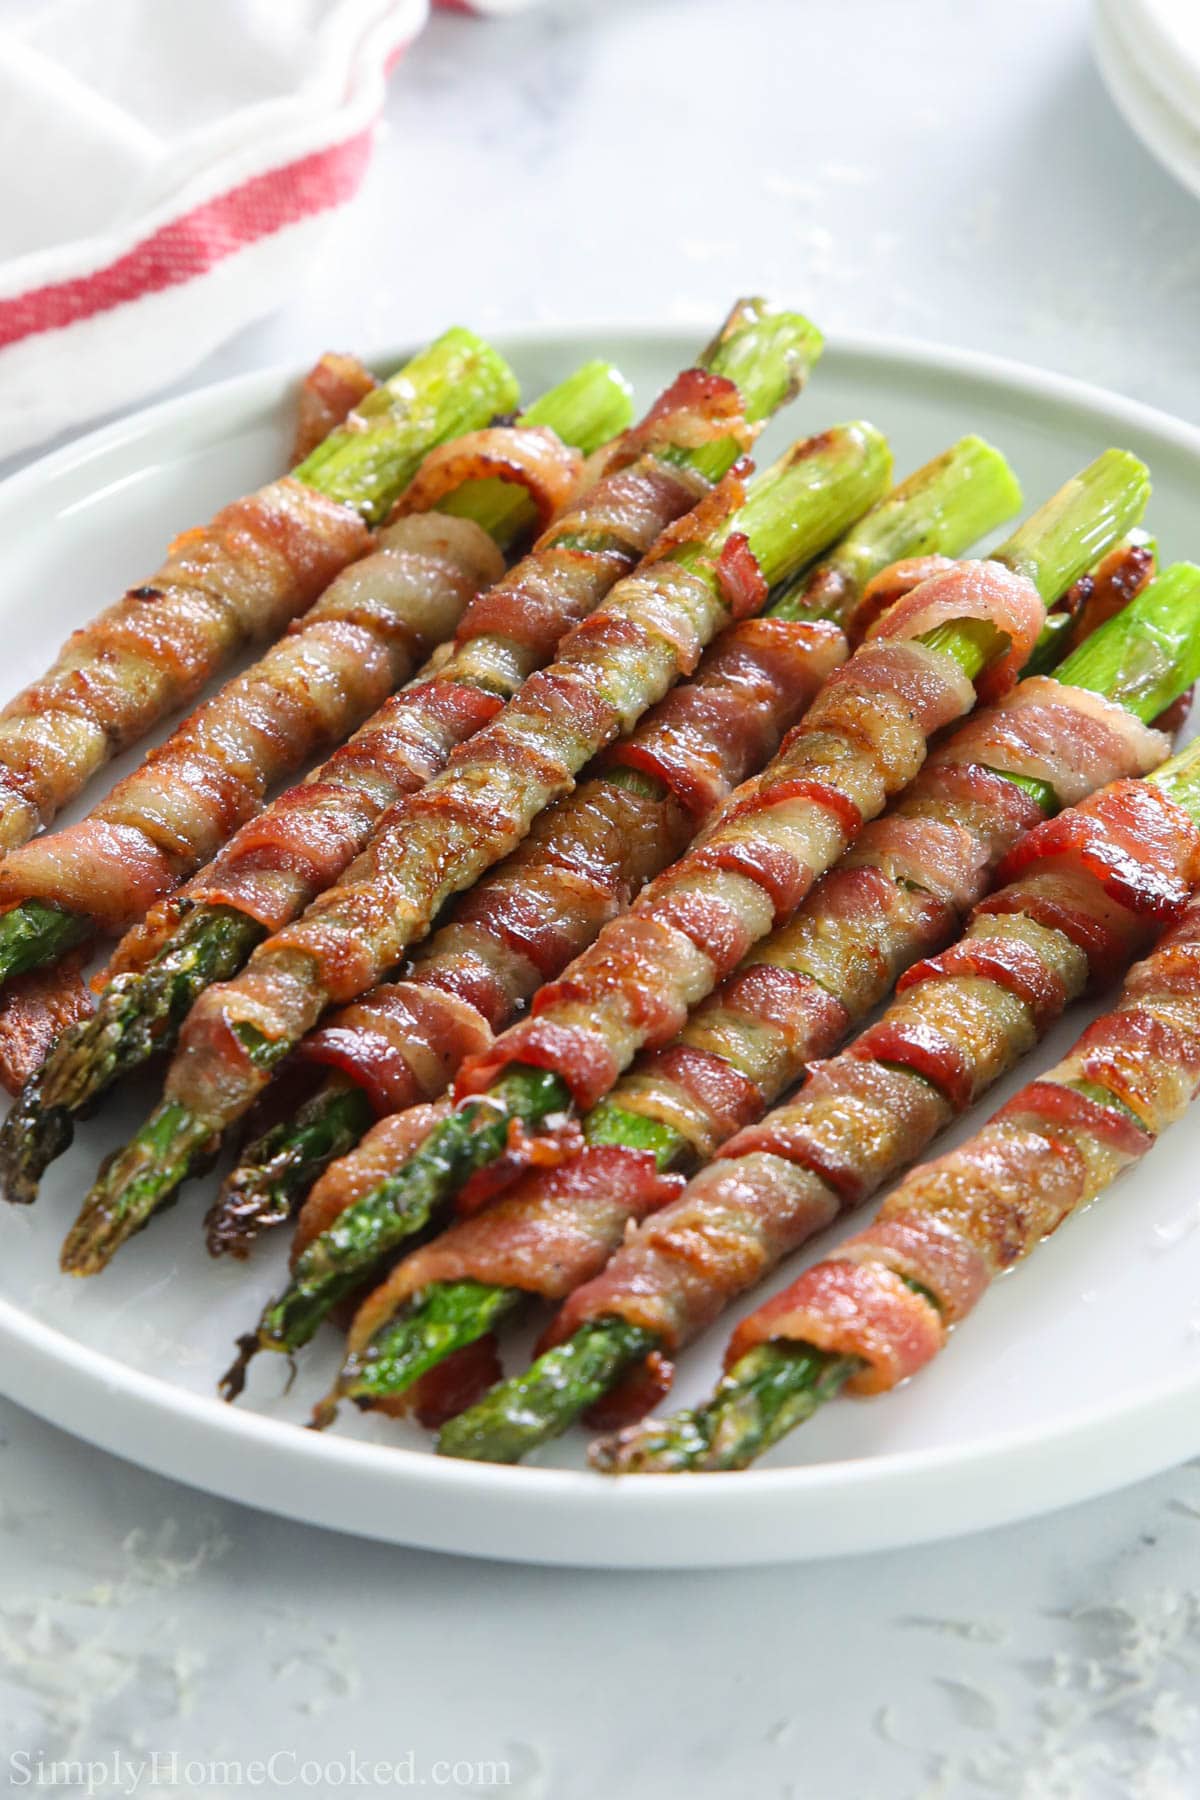 Vertical image of Bacon Wrapped Asparagus on a plate